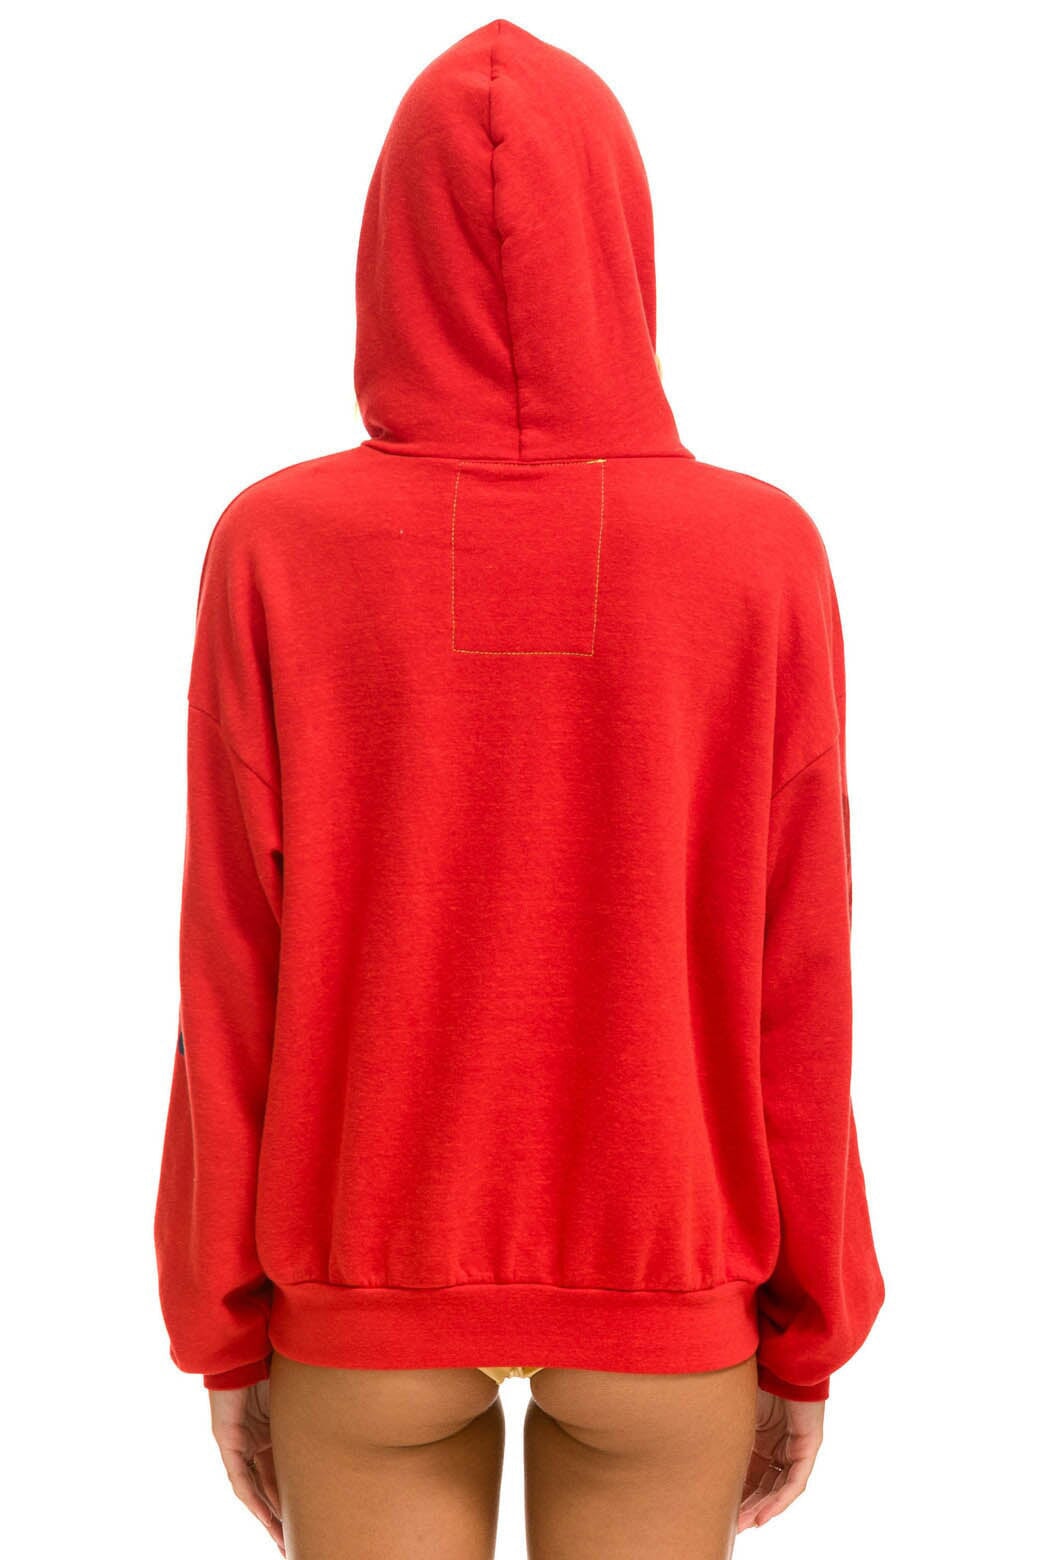 AVIATOR NATION VAIL RELAXED PULLOVER HOODIE - RED Hoodie Aviator Nation 